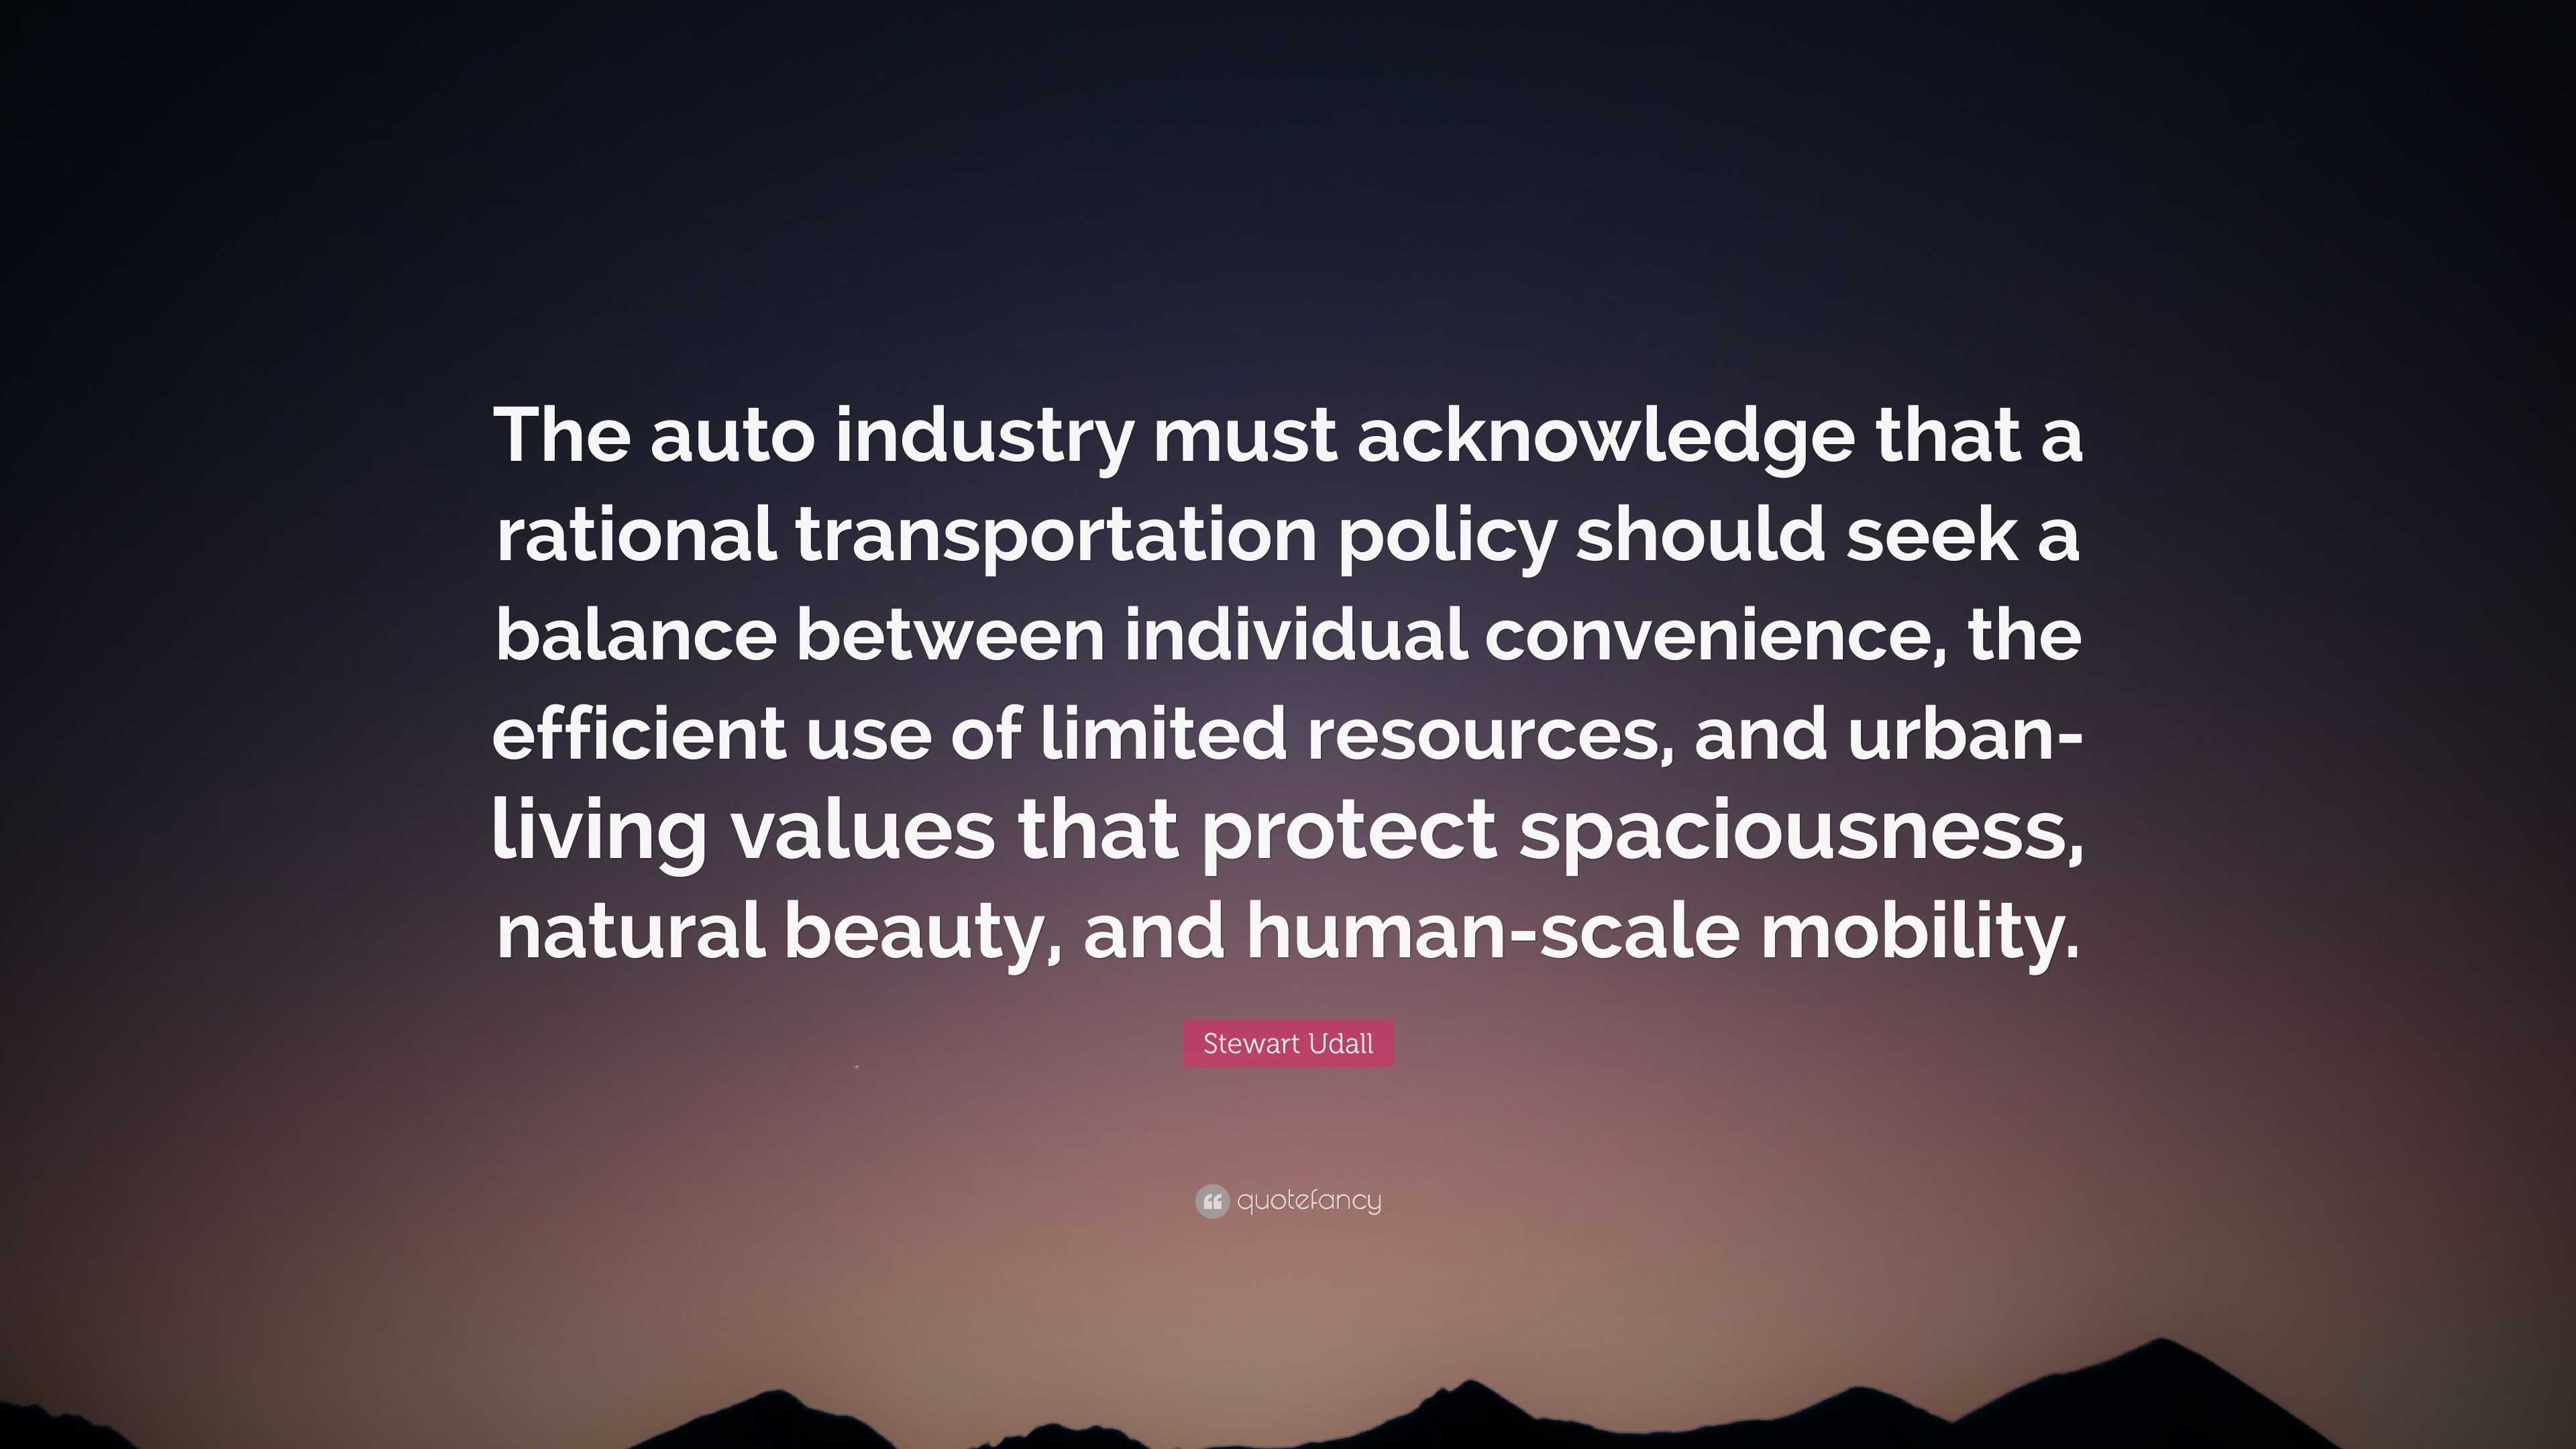 https://quotefancy.com/media/wallpaper/3840x2160/5937098-Stewart-Udall-Quote-The-auto-industry-must-acknowledge-that-a.jpg